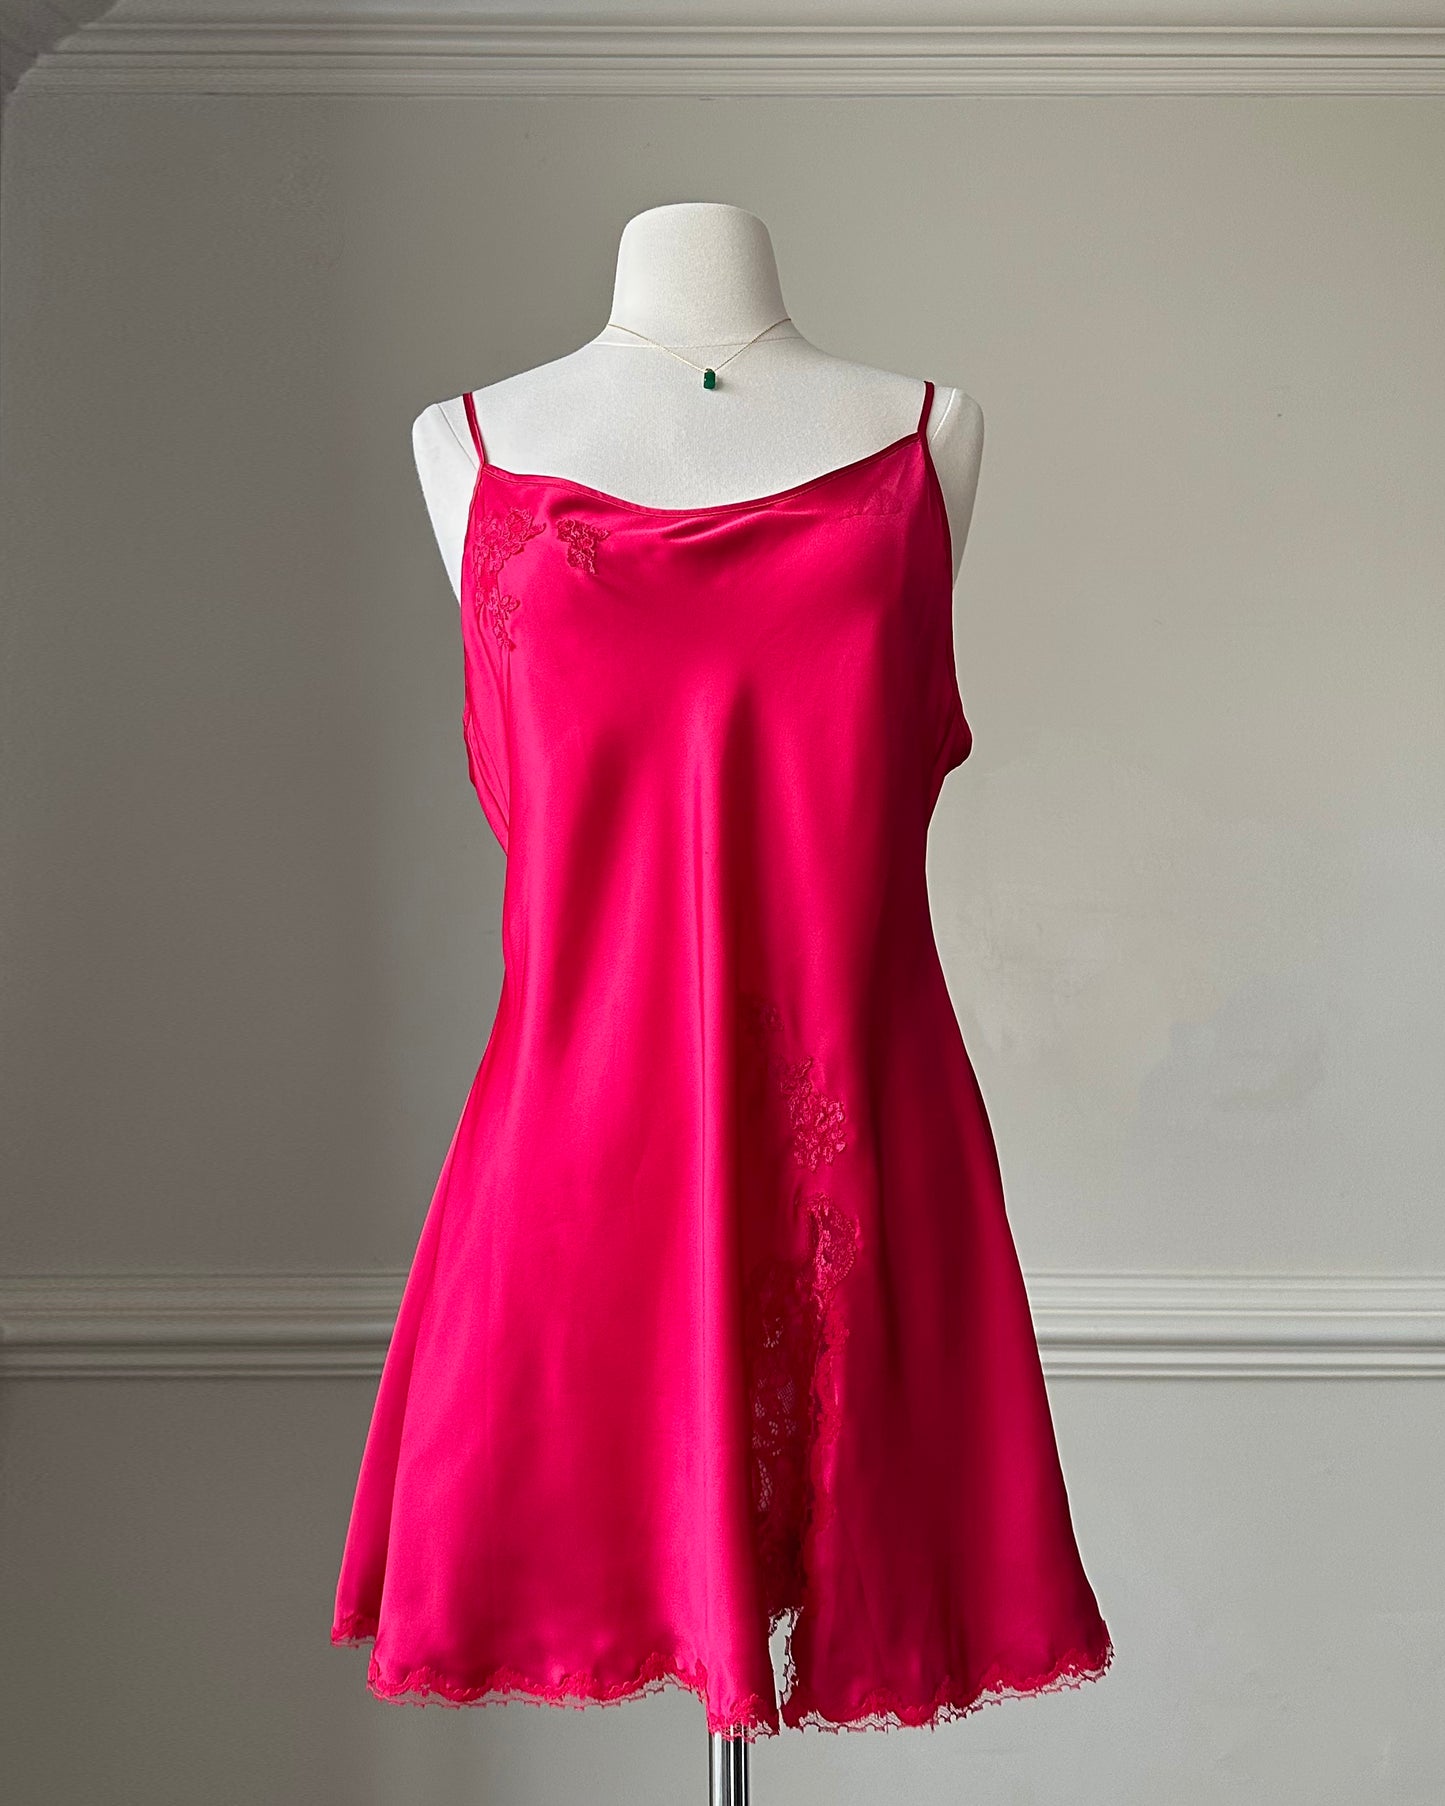 Victoria’s Secret Sultry Red Slip Dress featuring Lace Embroidery Lining